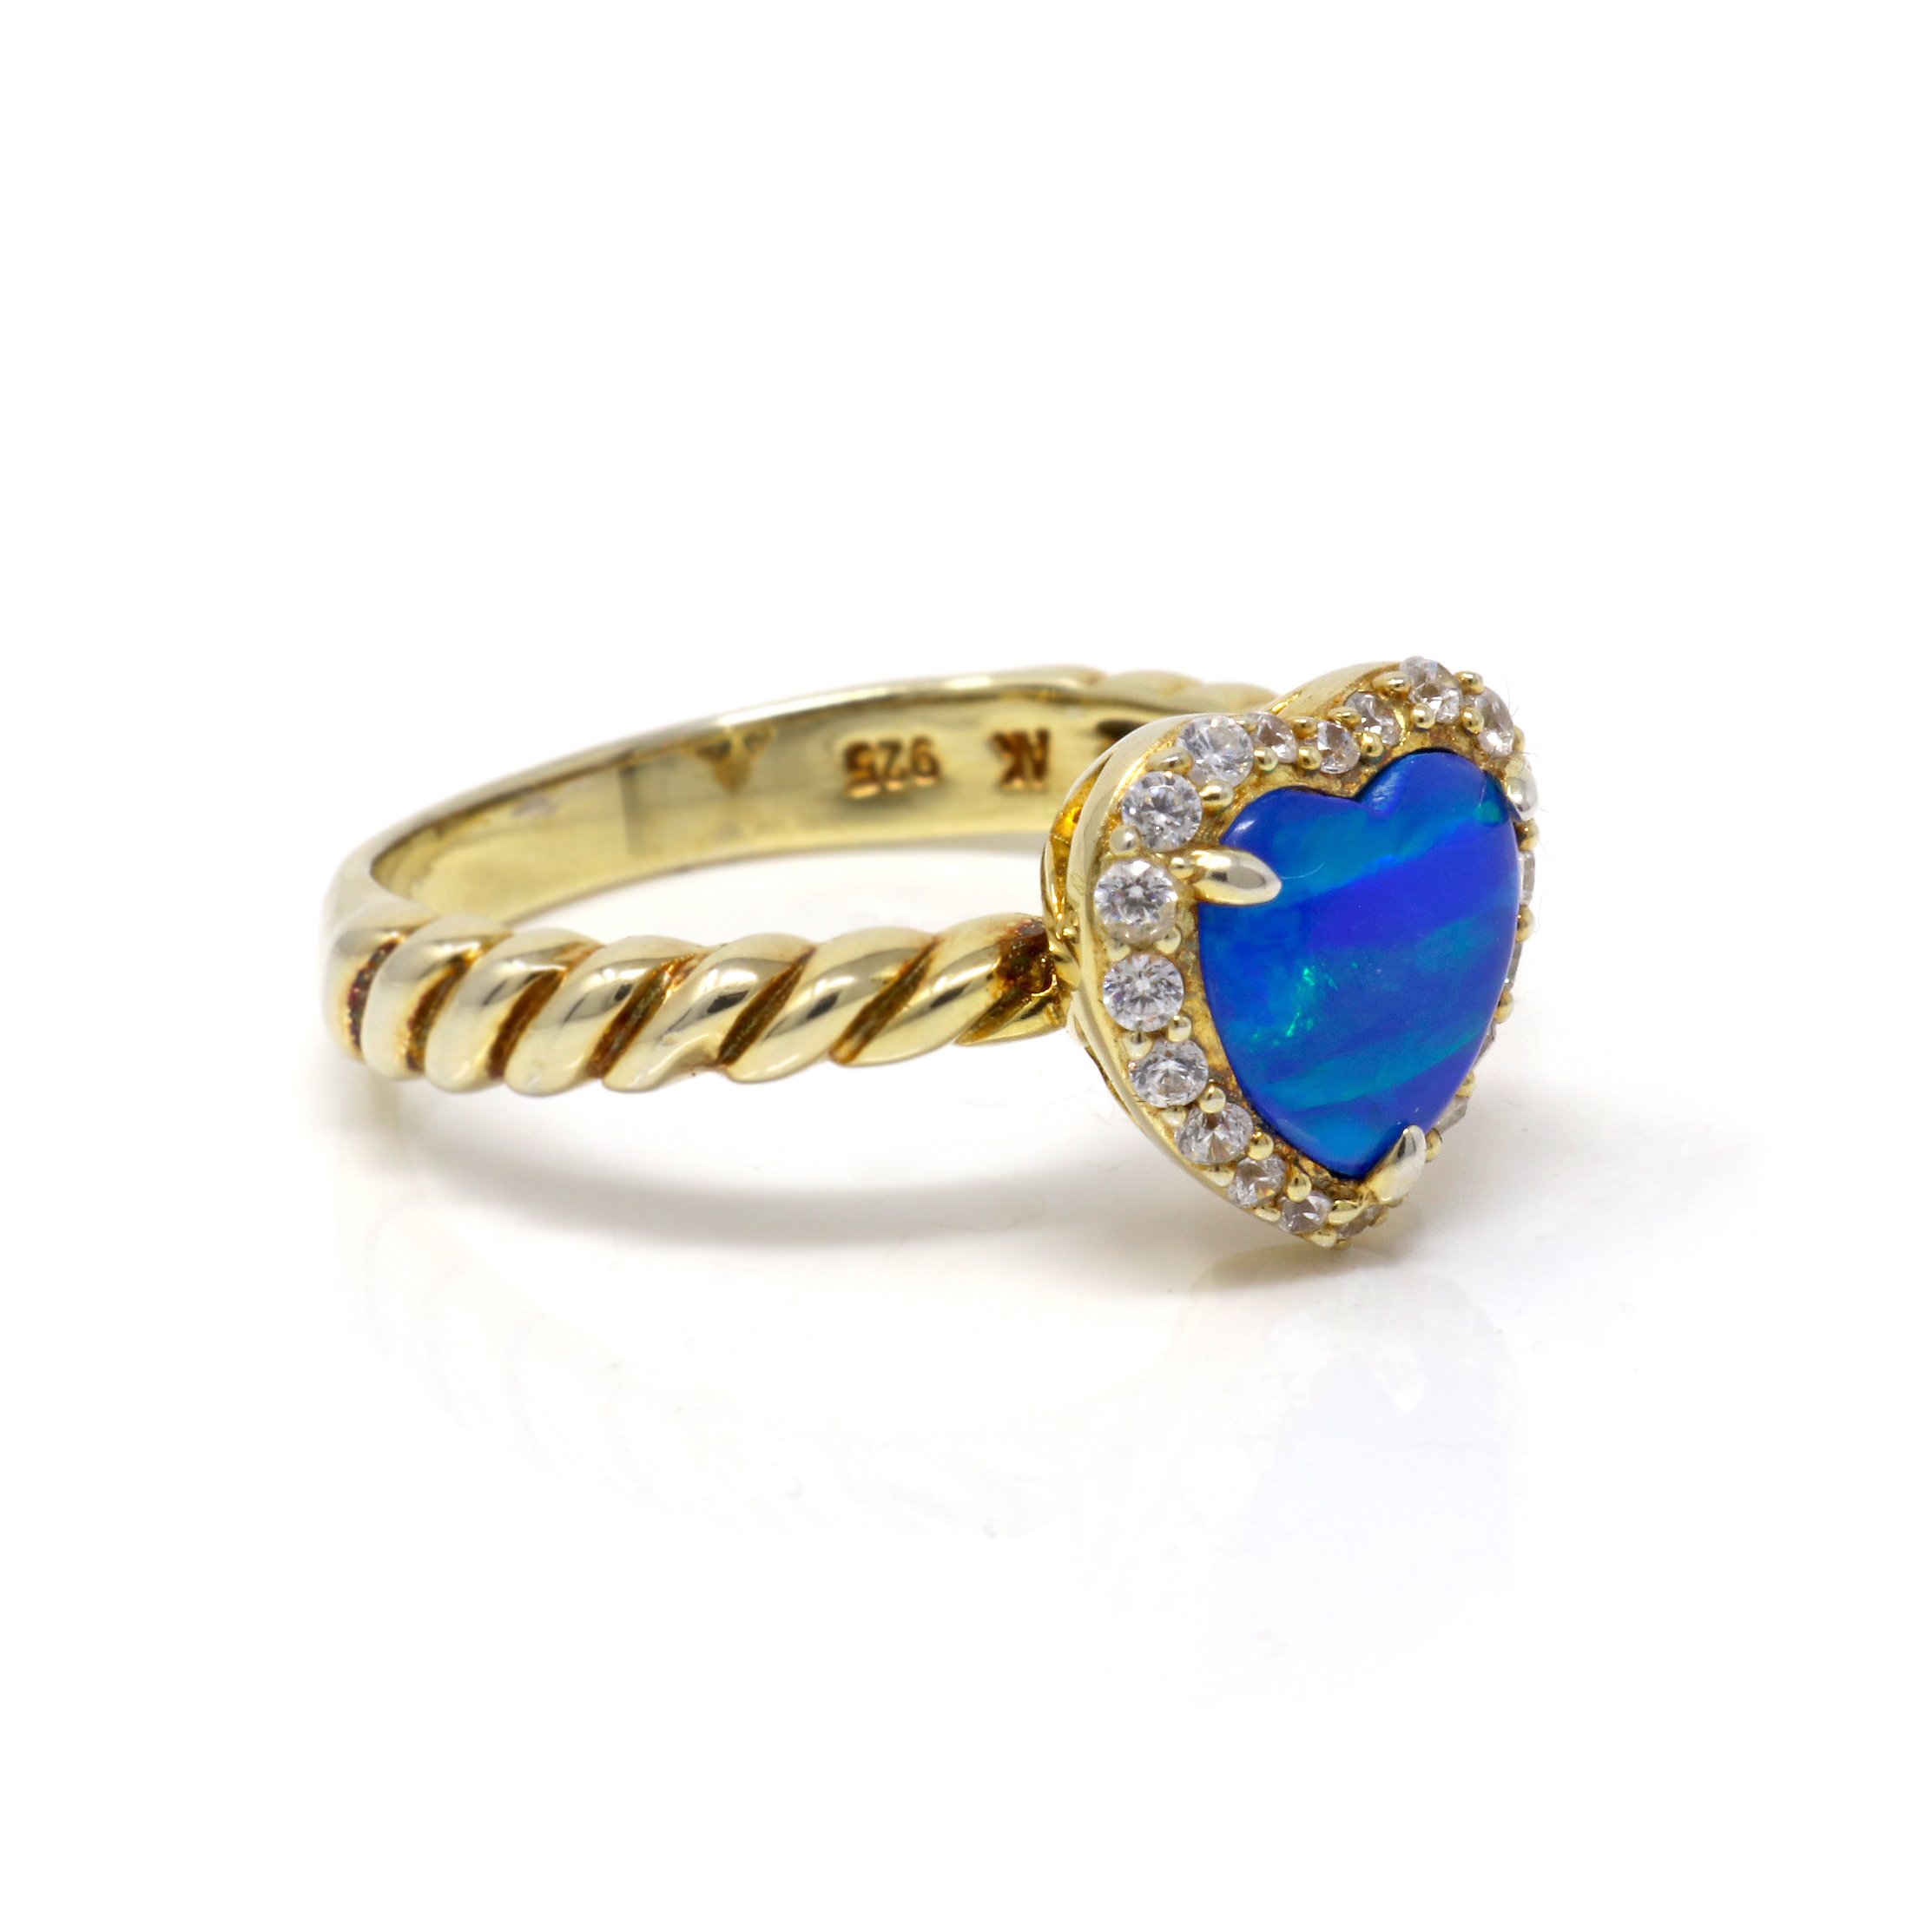 Blue Opal Heart Ring Size 8 With Gold Vermeil And White Czs On Bezel sz8